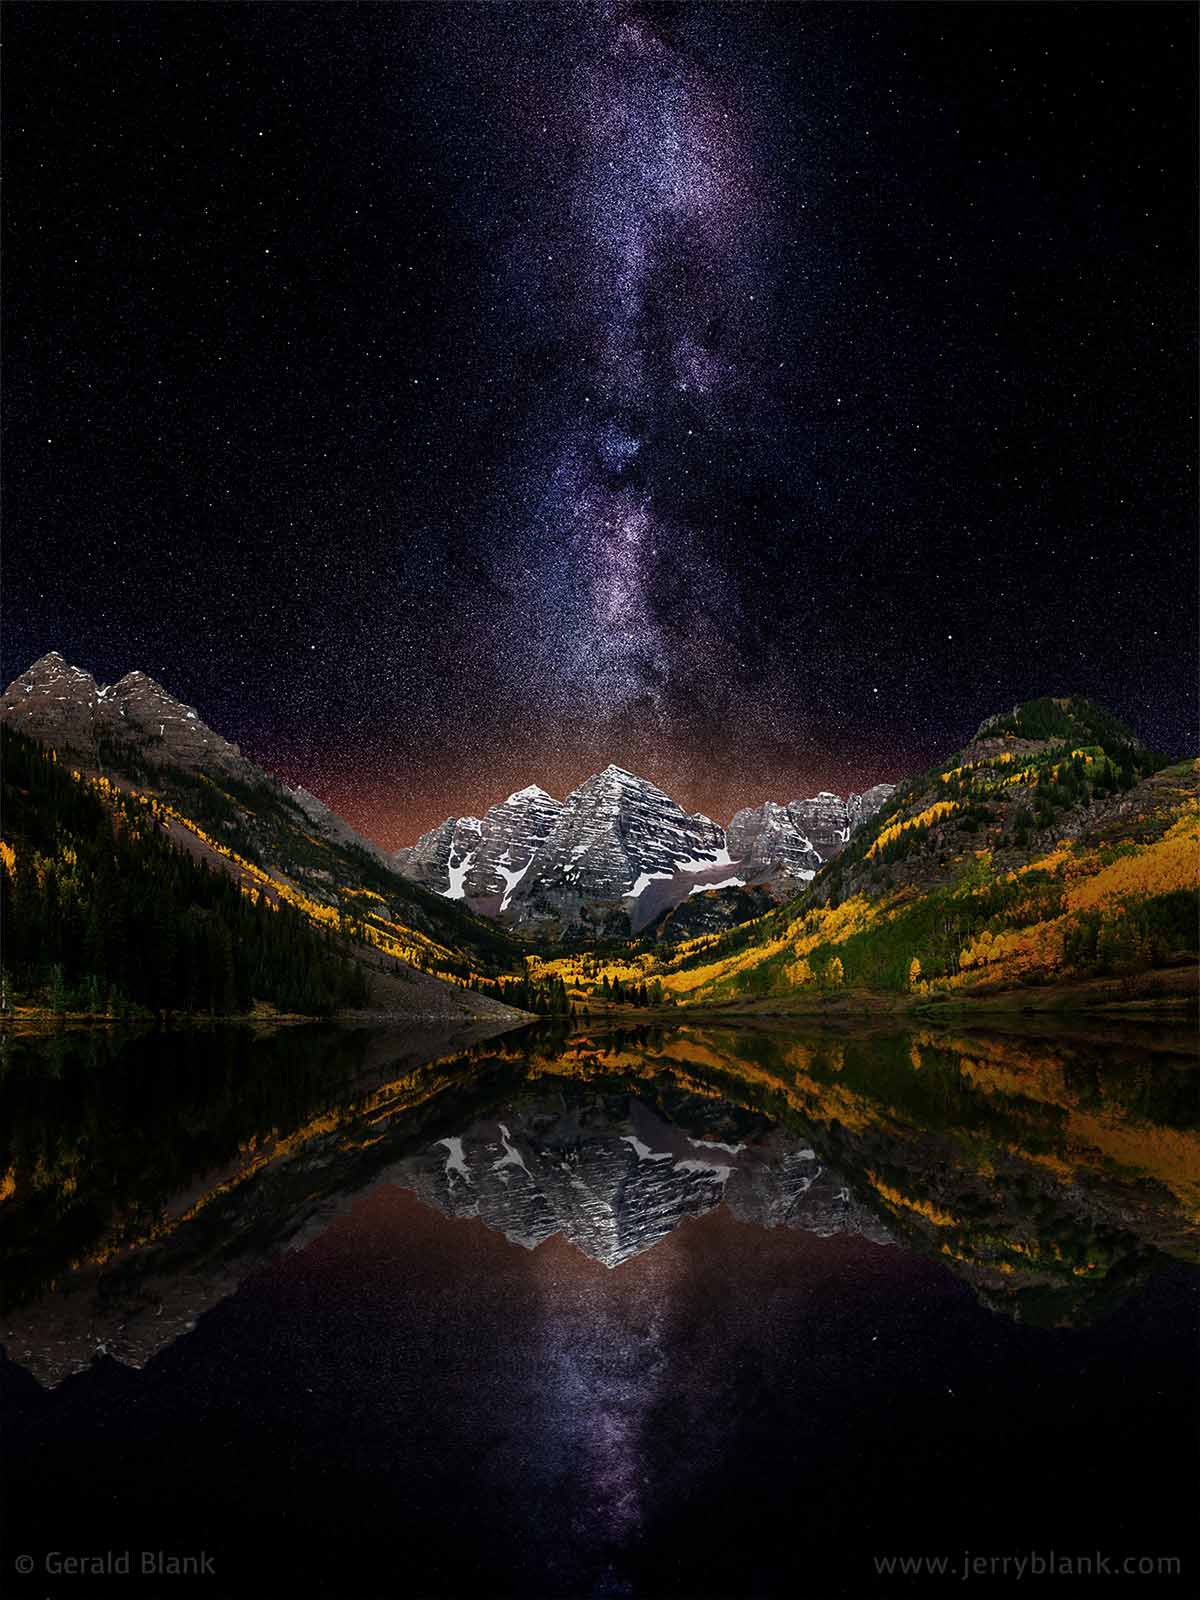 #40560 - A starry night view of the Milky Way and the Maroon Bells in autumn, reflected in Maroon Lake, Colorado - photo by Jerry Blank